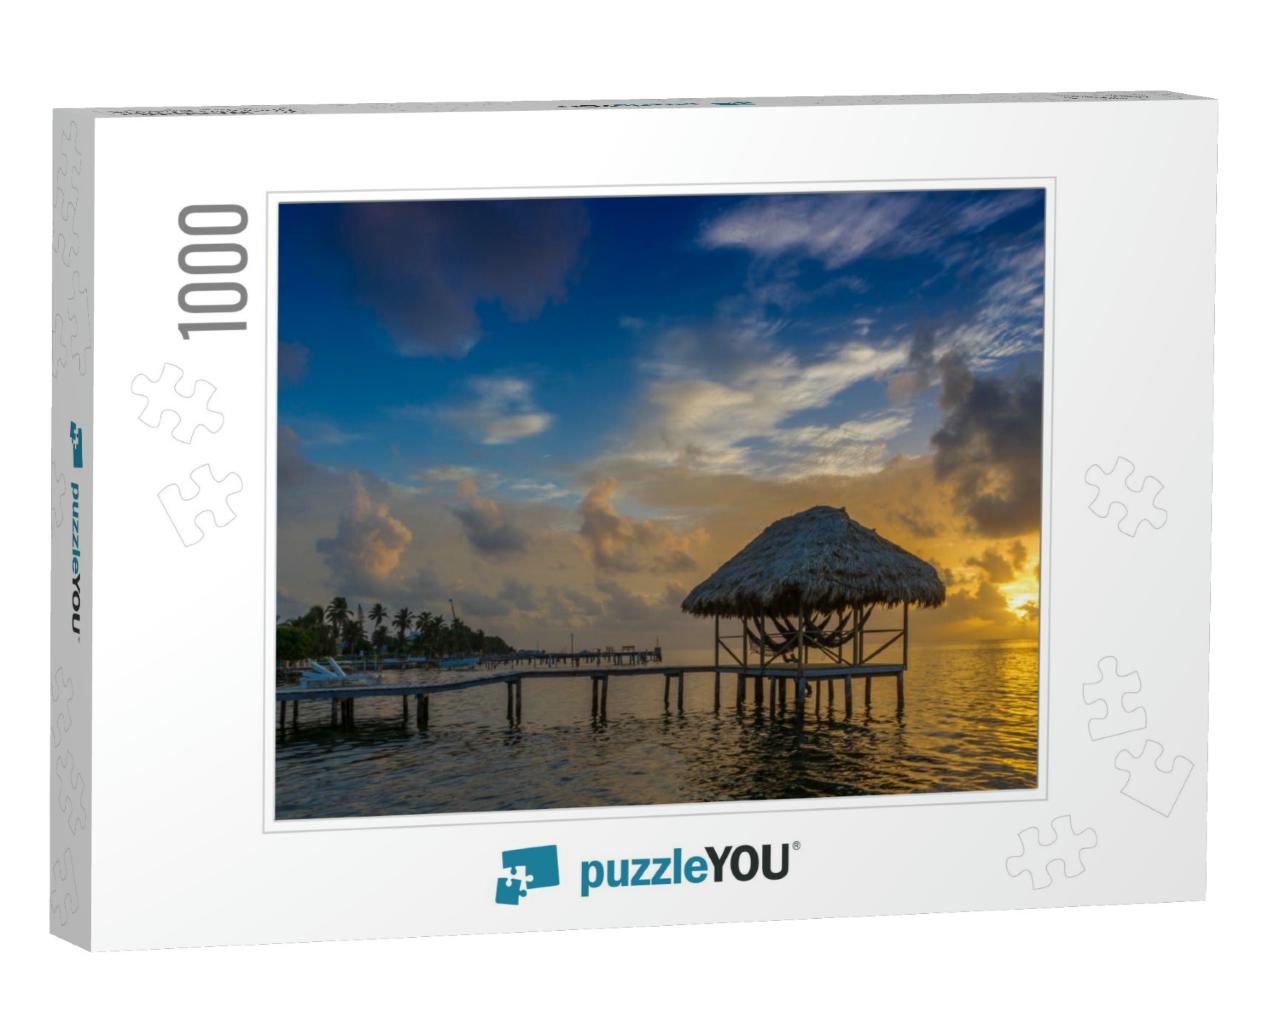 Dock with Cabana Overlooking Beautiful Caribbean Sea Sunr... Jigsaw Puzzle with 1000 pieces